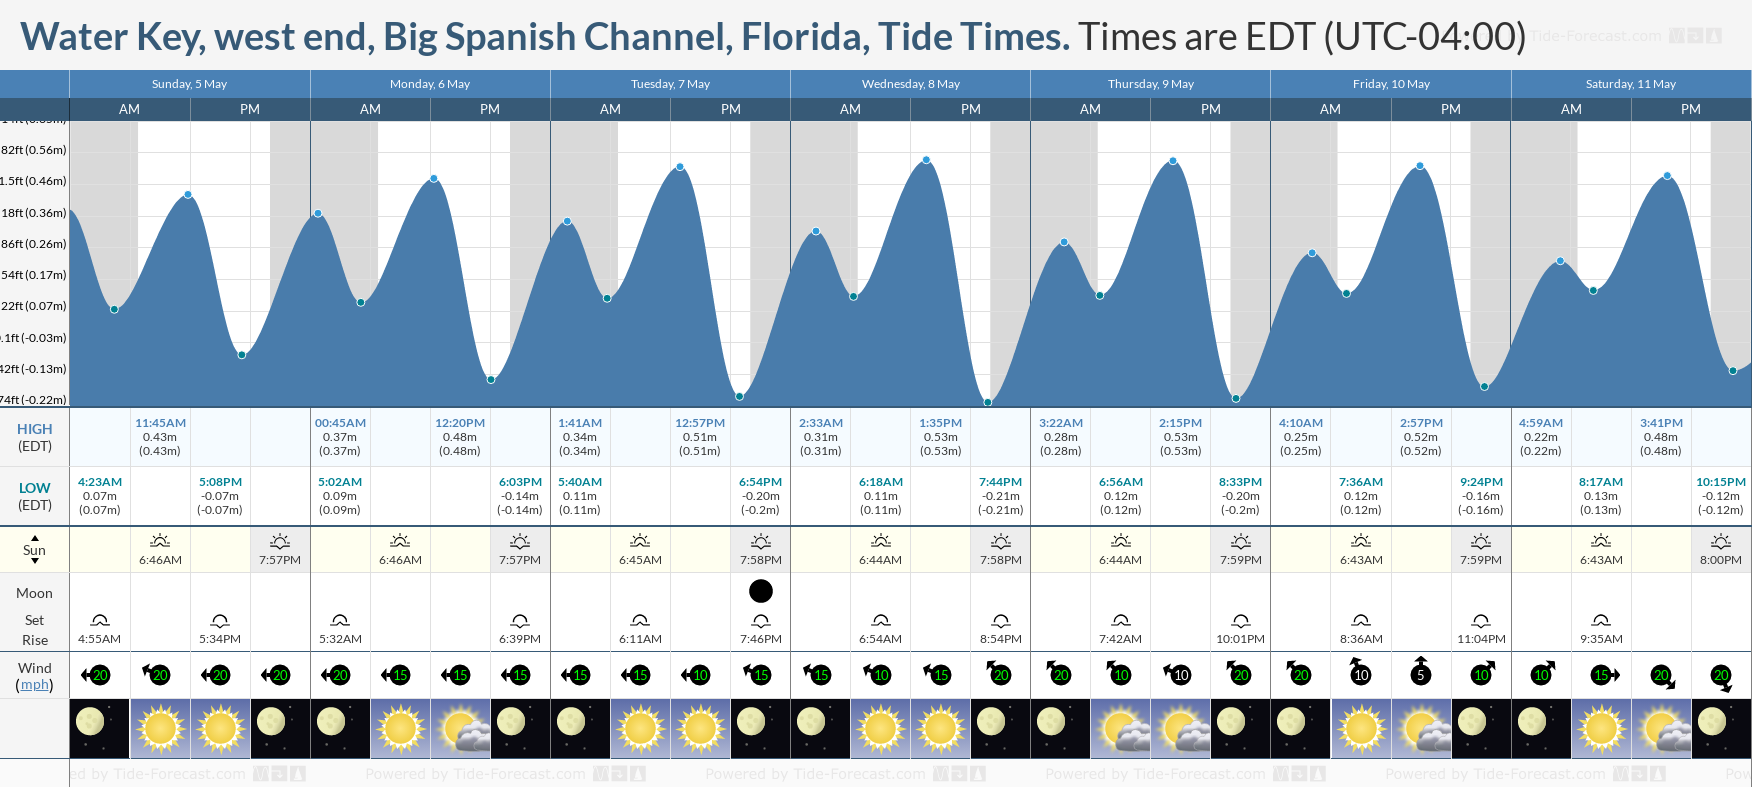 Water Key, west end, Big Spanish Channel, Florida Tide Chart including high and low tide tide times for the next 7 days